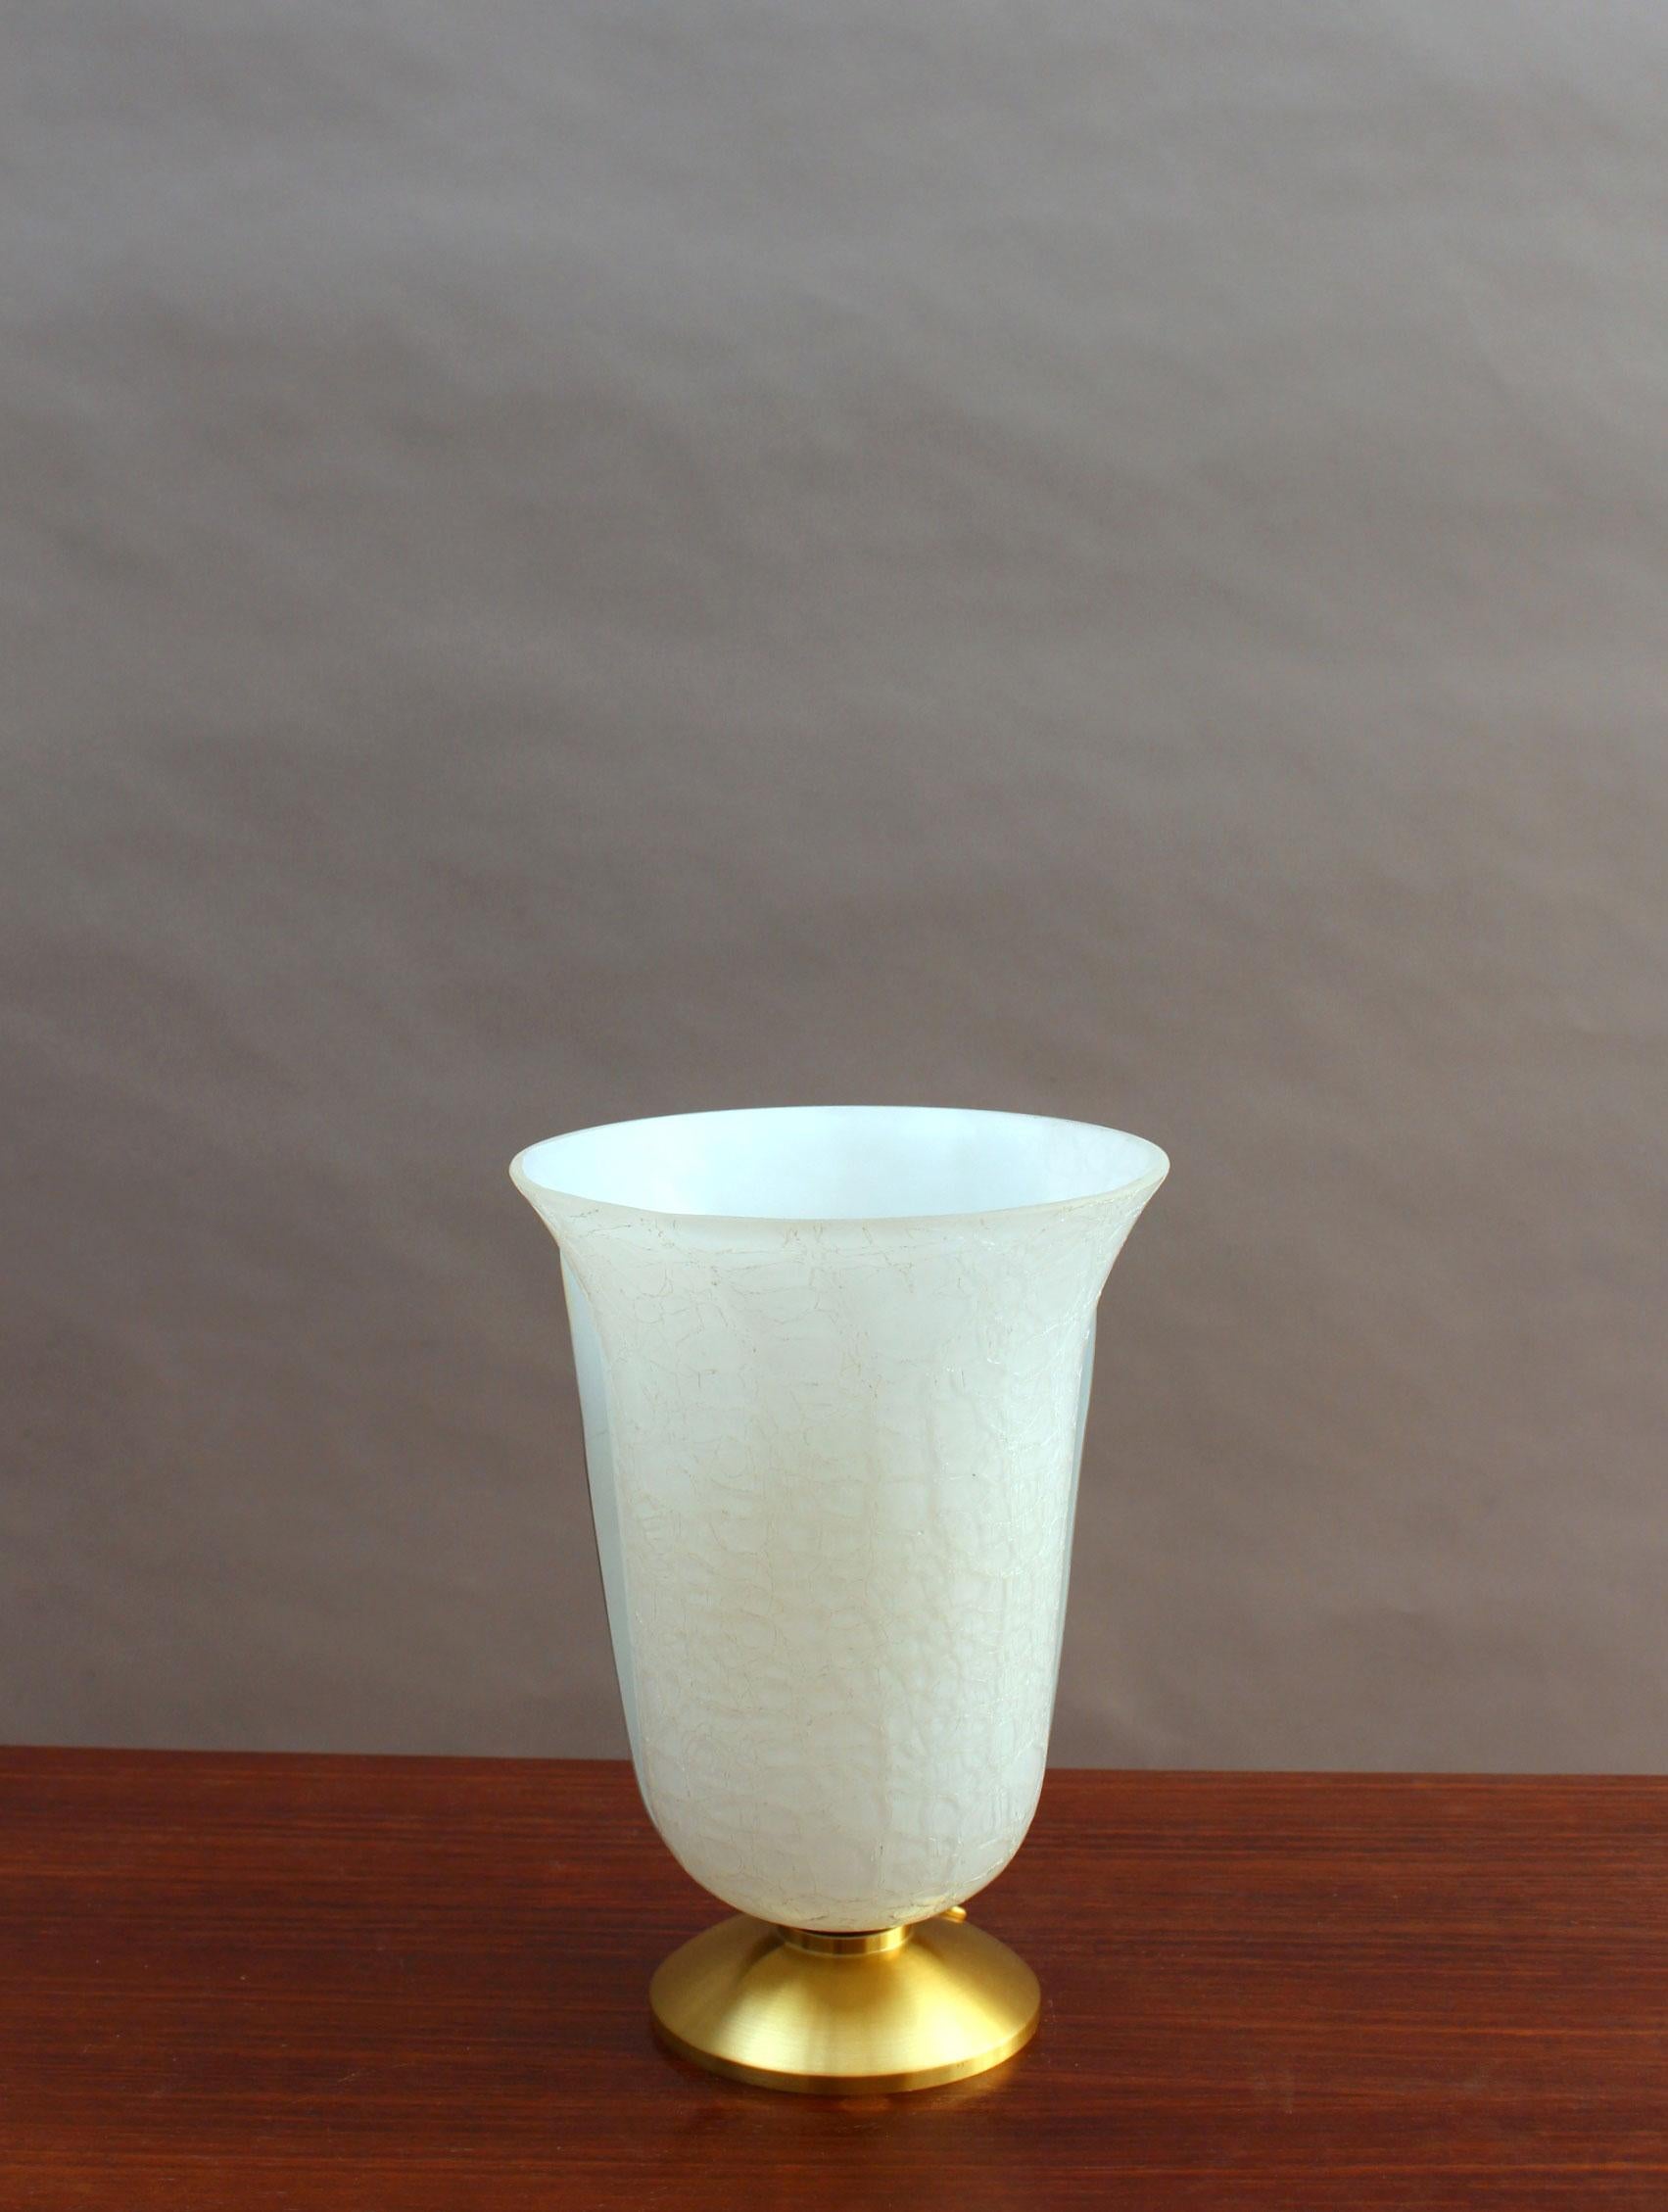 With a round brass base that supports a white crazed glass and brass tulip-shaped shade.
Signed.